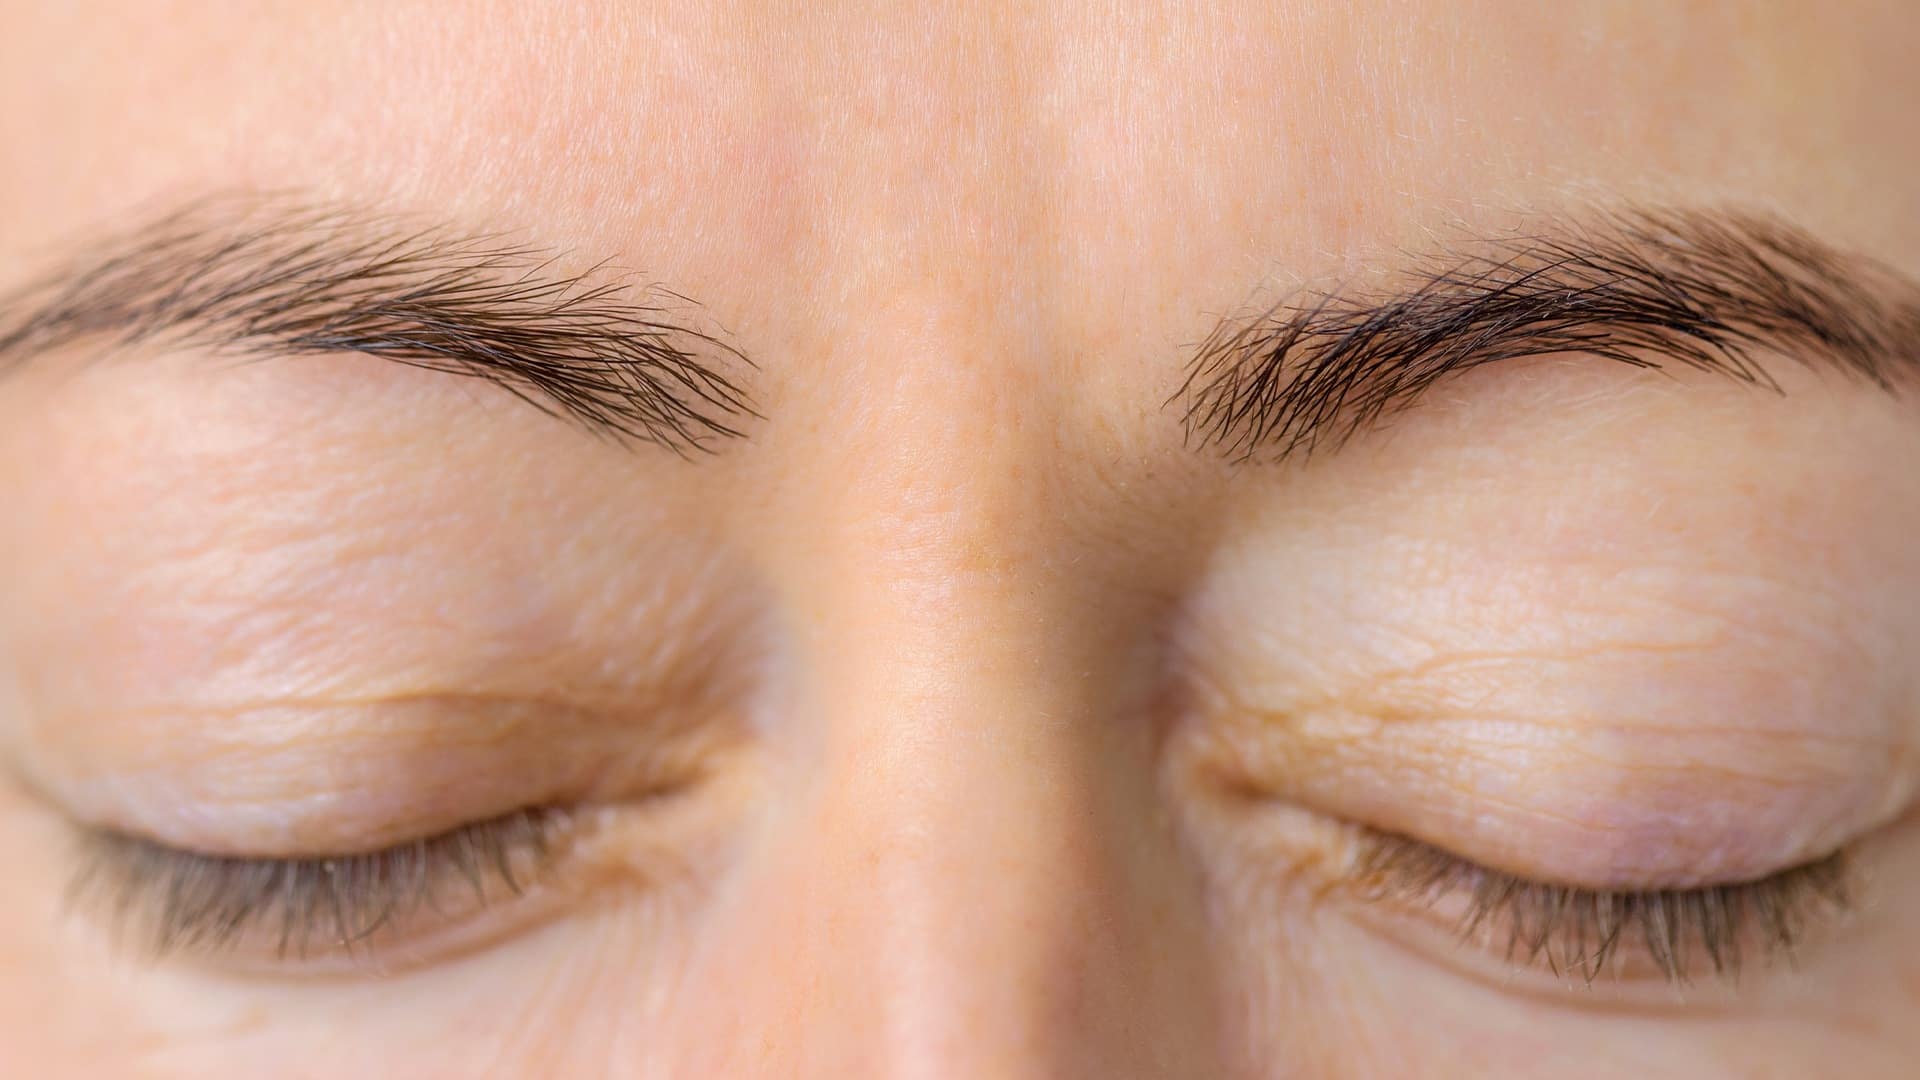 Reduced Brow Line Wrinkles After Dysport Treatment